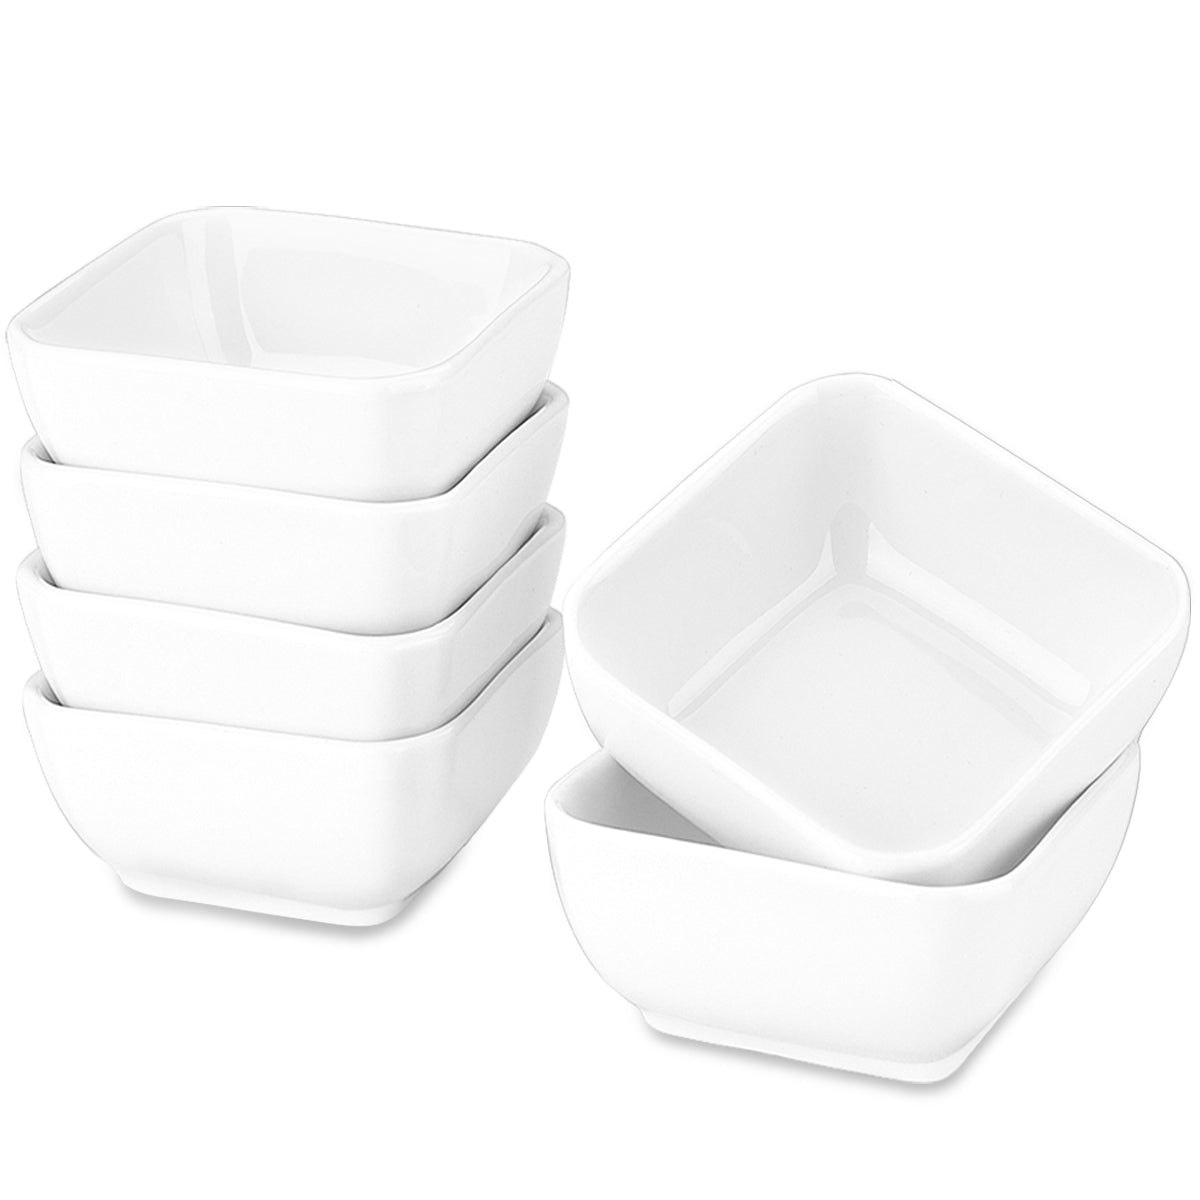 Delling Ultra-Strong 5 Oz Ceramic Bowl Set, Natural White Dipping Bowls with Compact Design for Tomato Sauce, Pizza, BBQ and other Party Dinner - Set of 6